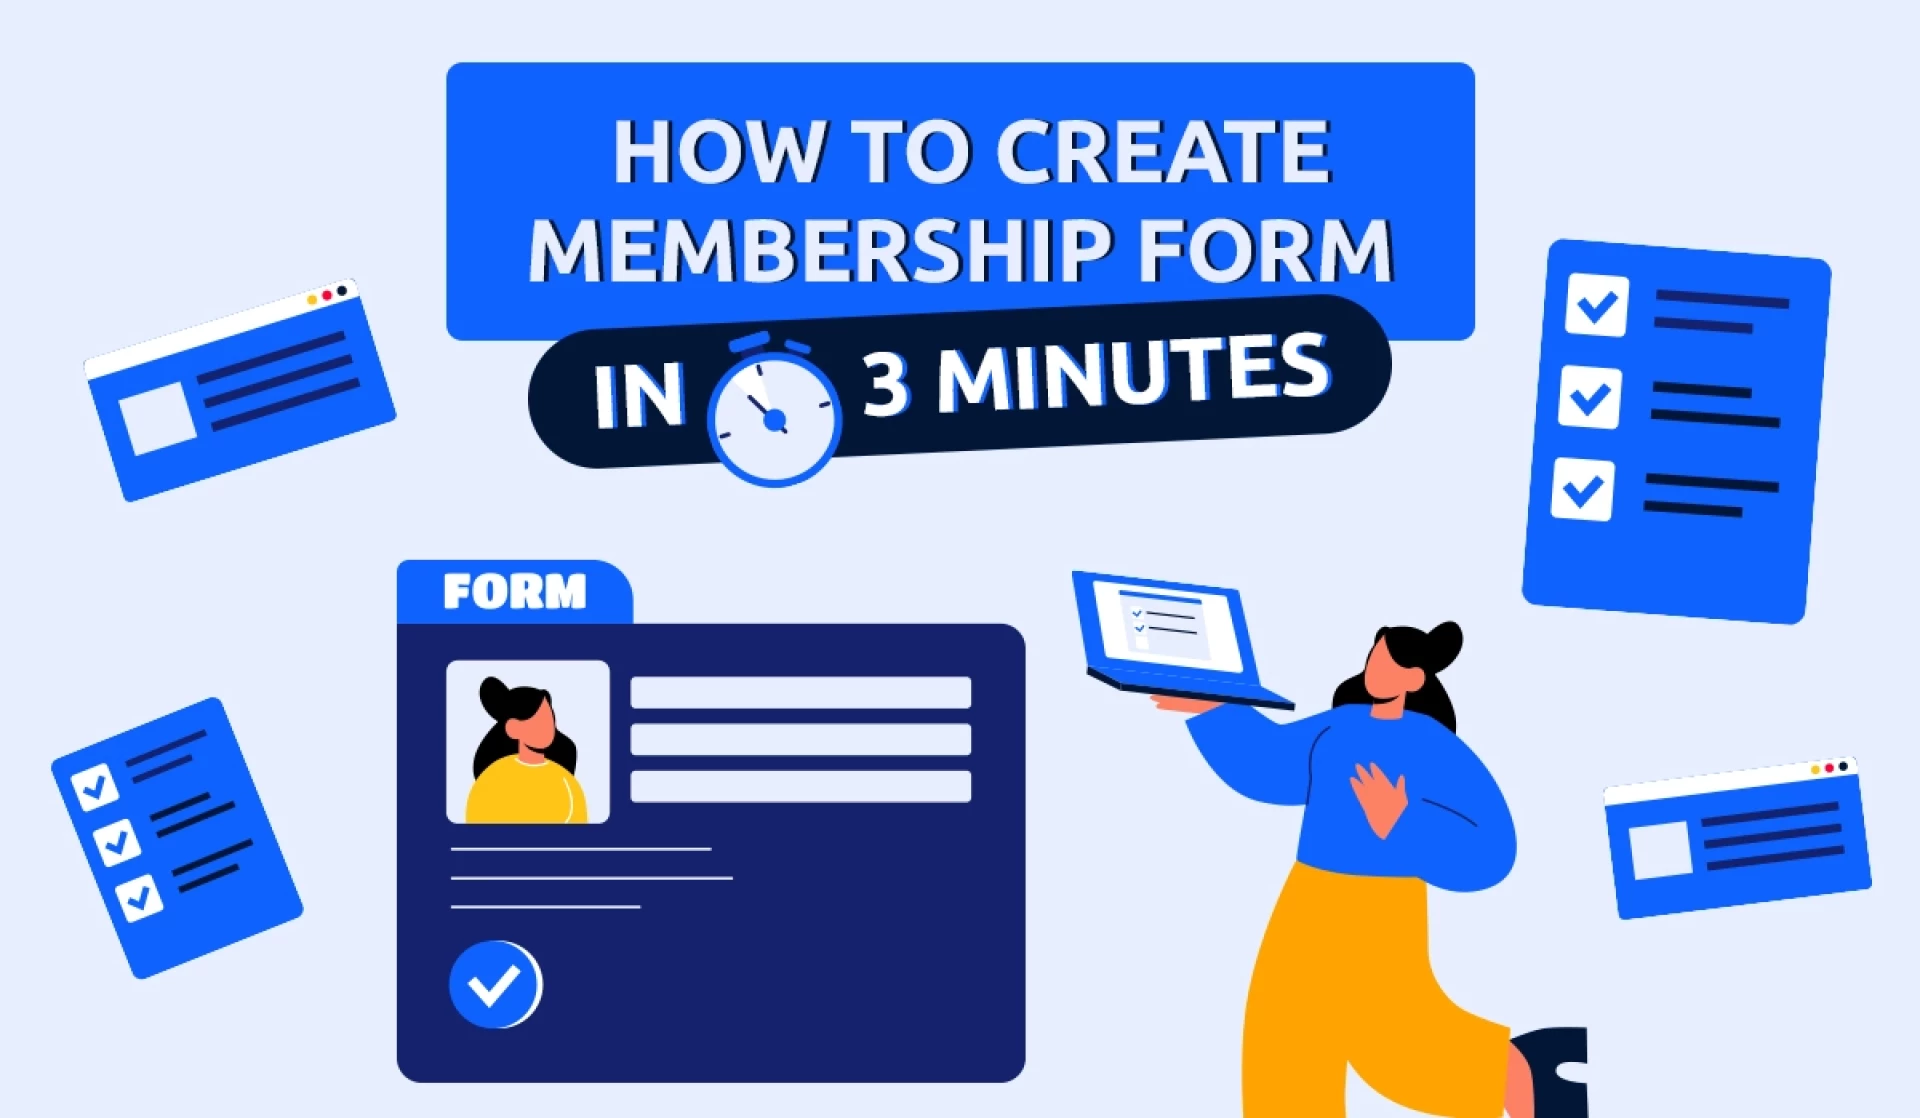 How to Create a Membership Form in 3 Minutes?